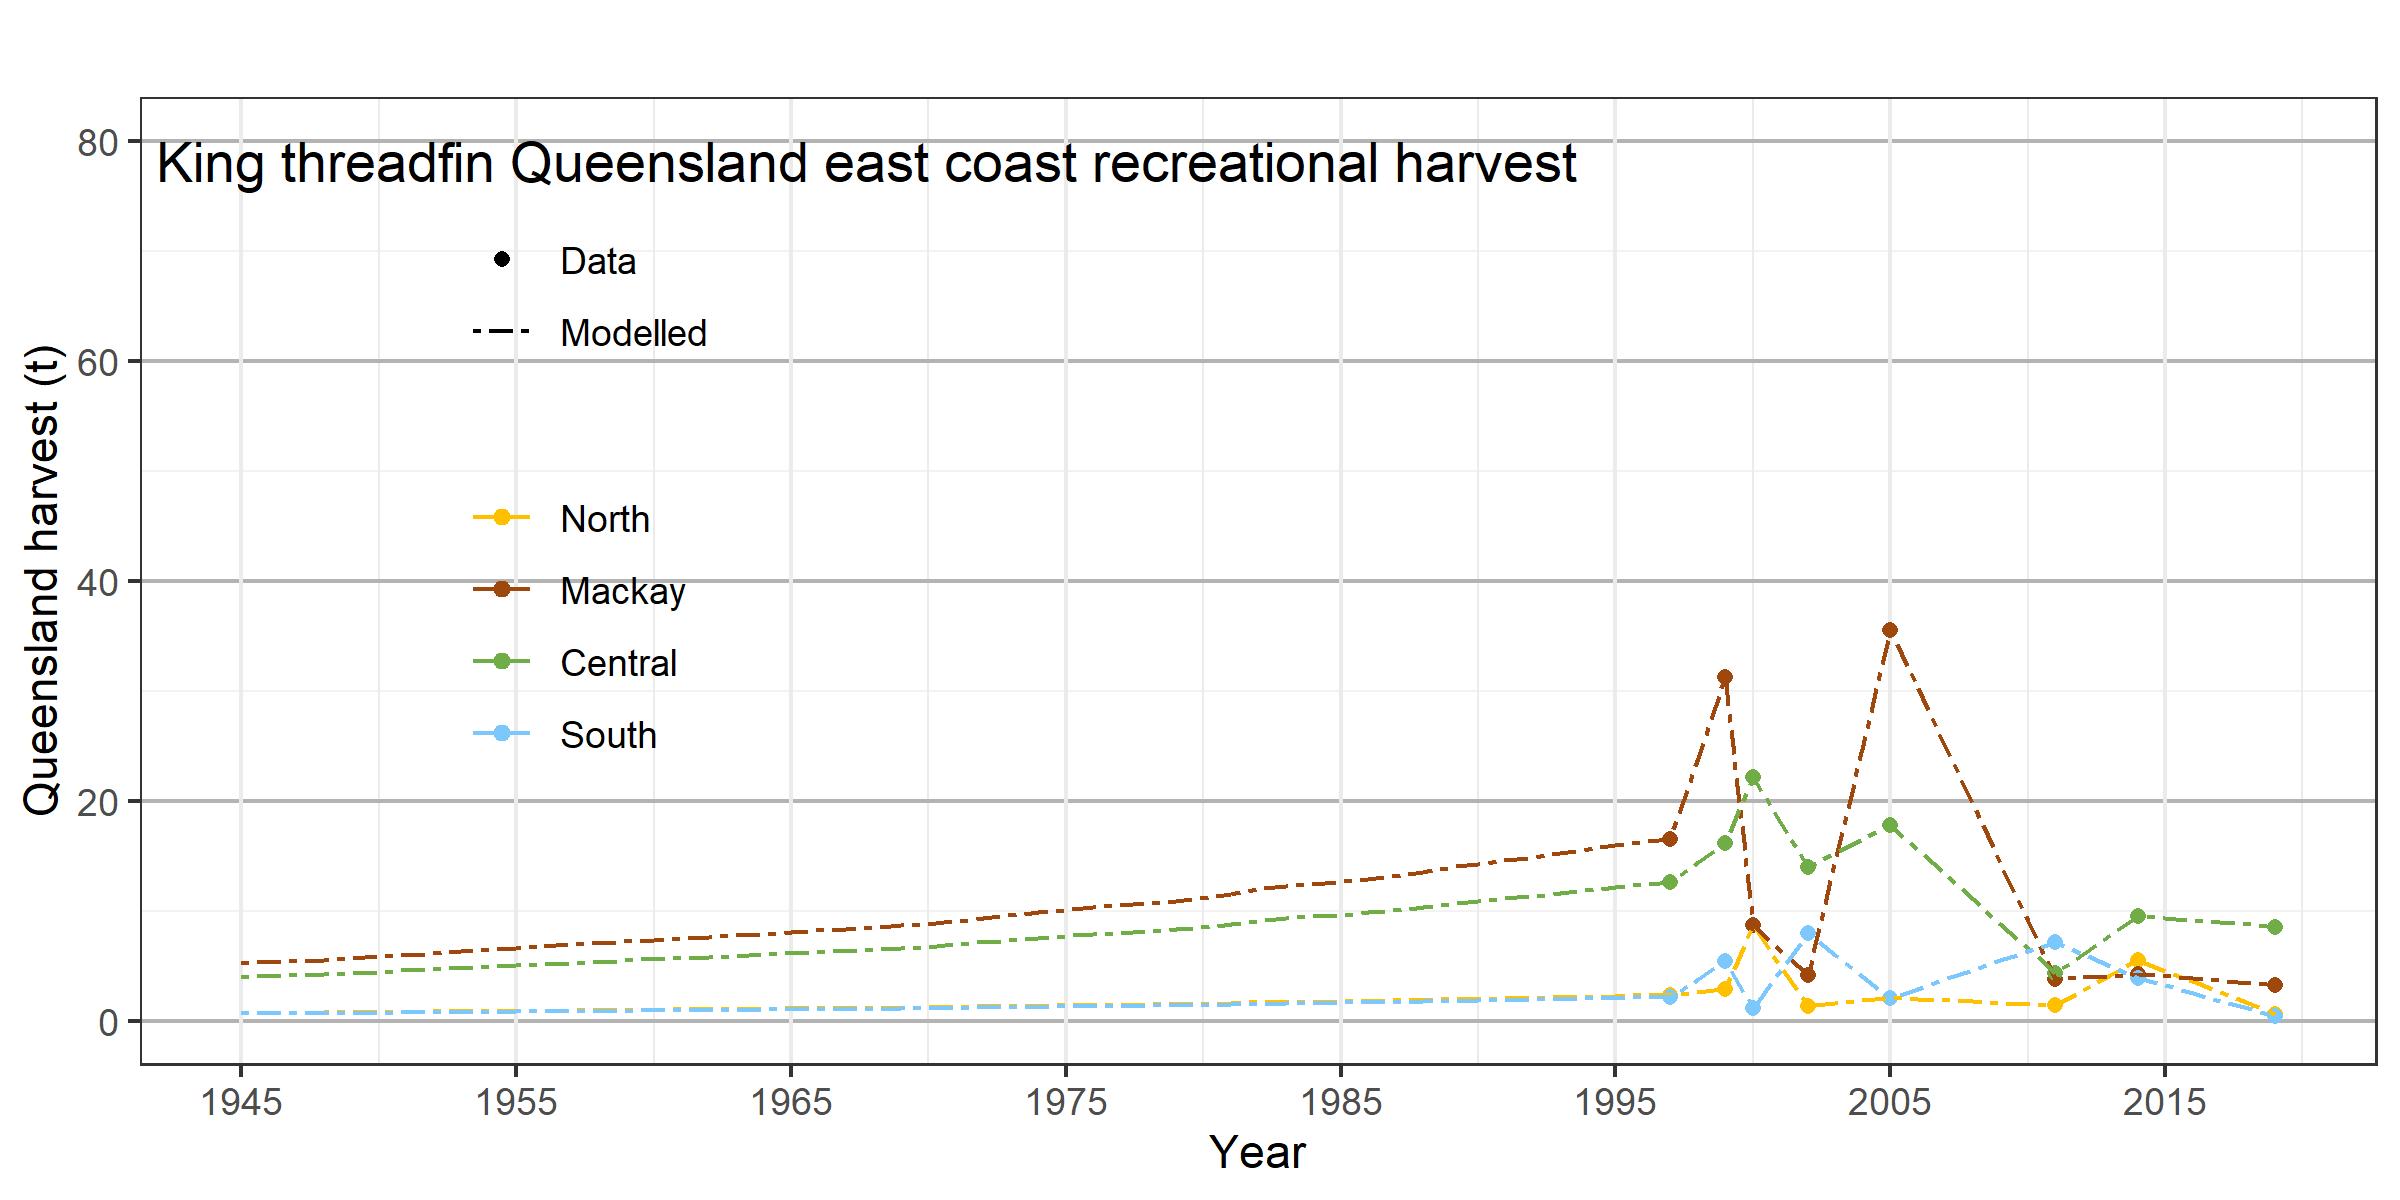 The chart presents east coast king threadfin harvest taken by recreational fishers from 1945 to 2019. The recreational harvest is modelled from 1945 to 2019 apart from 1997, 1999, 2000, 2002, 2005, 2011, 2014 and 2019 where survey data is available. 